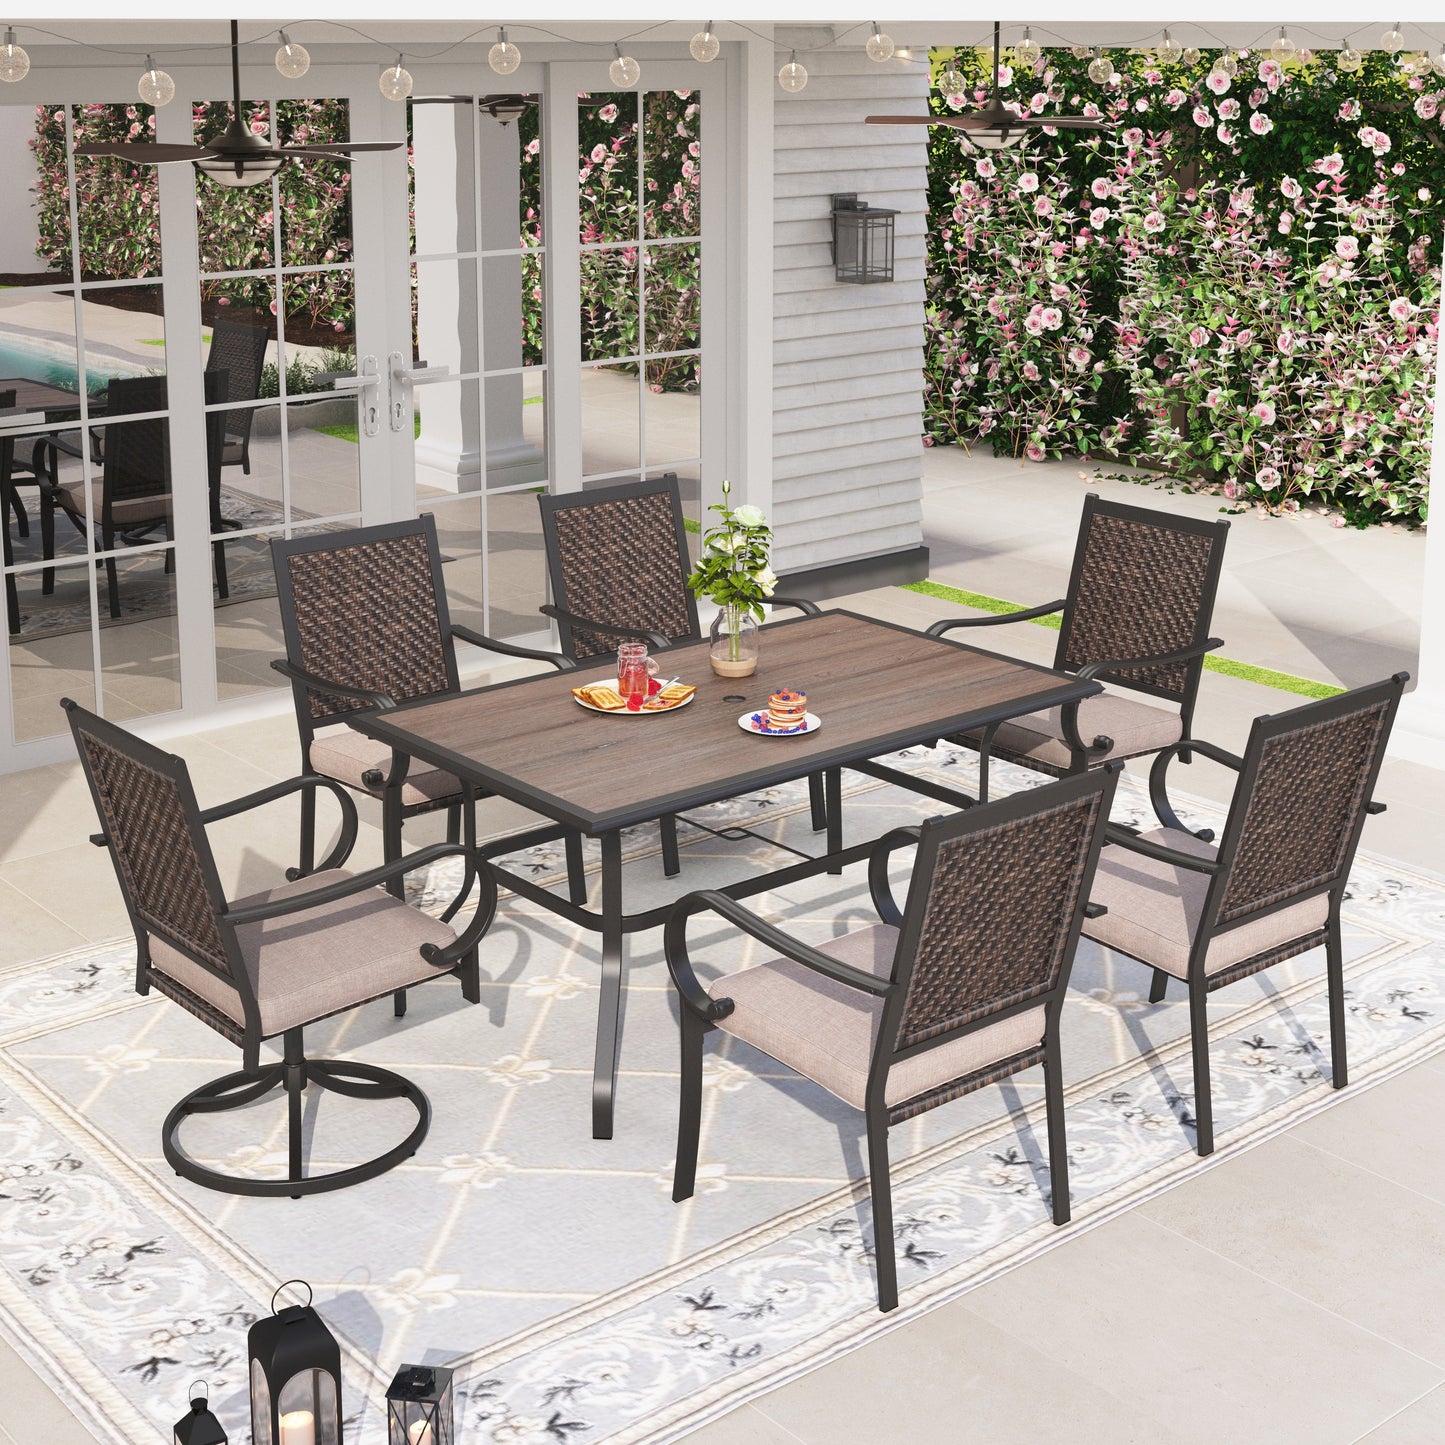 Sophia & William 7 Pieces Outdoor Patio Dining Set with 2 Swivel Wicker Chairs, 4 Fixed Wicker Chairs and 1 Rectangle Steel Table for 6-person